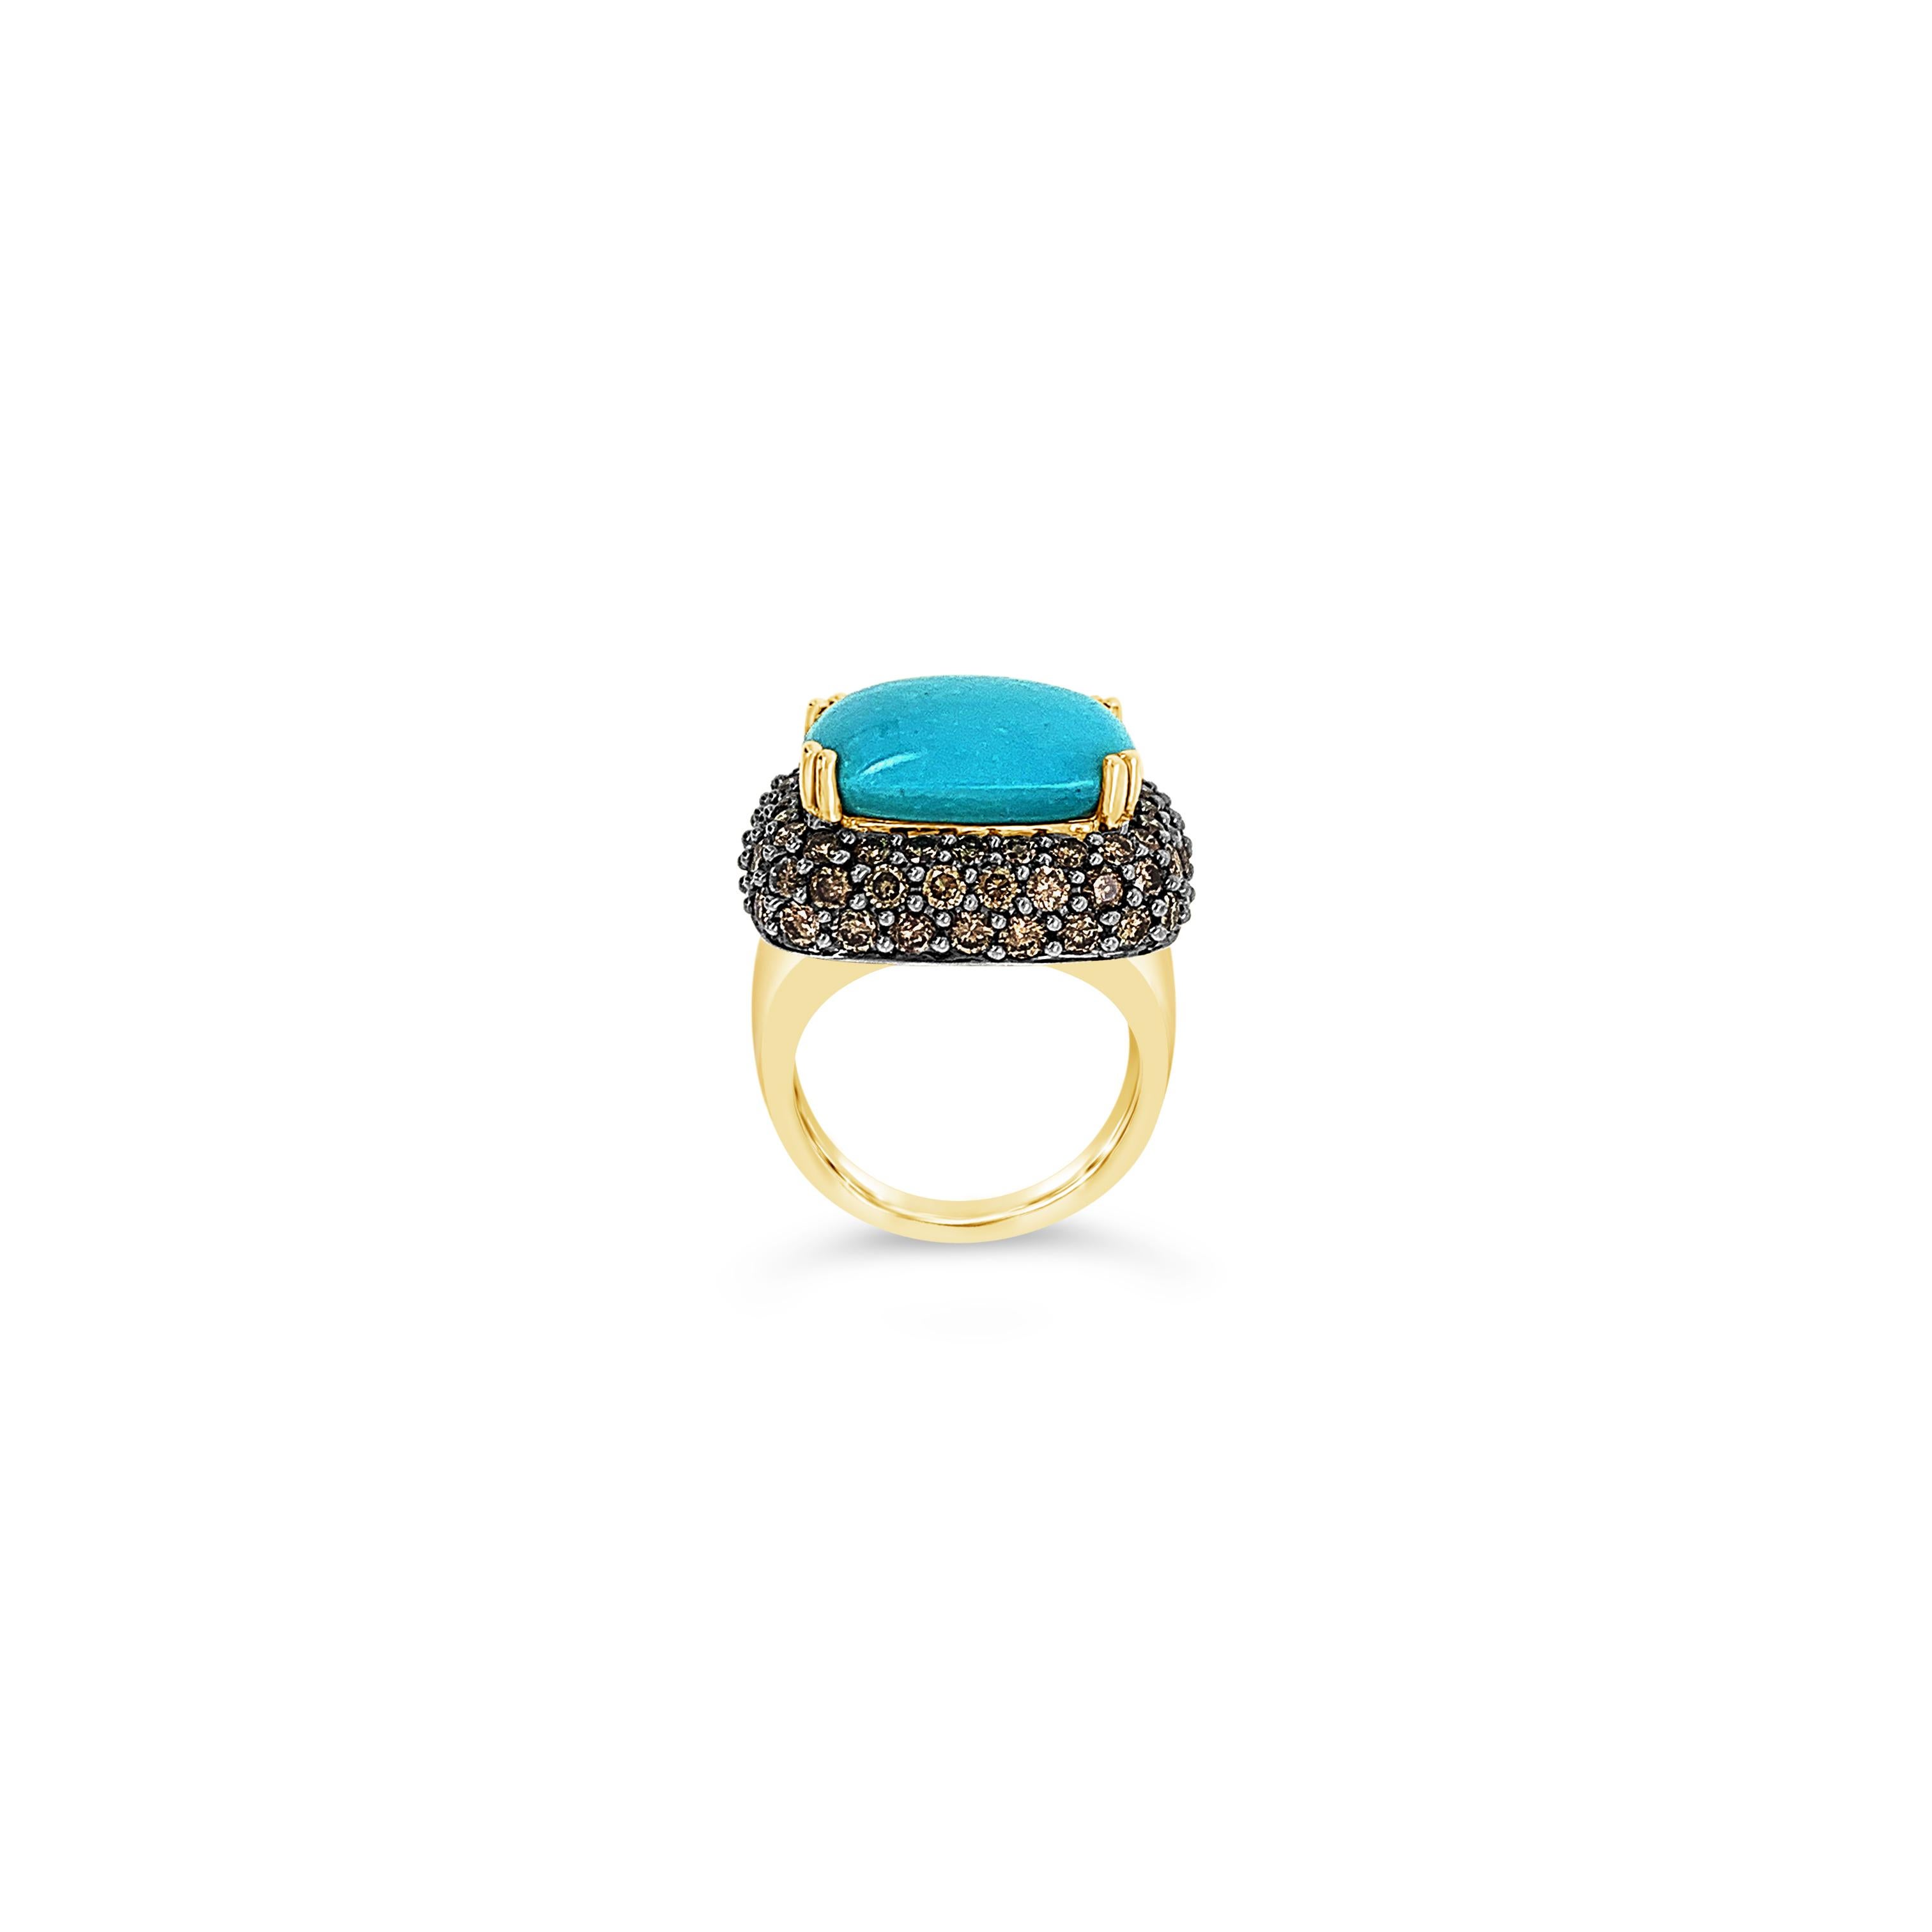 Carlo Viani® Ring featuring 9 1/4 cts. Robins Egg Blue Turquoise™, 2 2/3 cts Chocolate Diamonds® set in 14K Honey Gold™
Diamonds Breakdown:
2 2/3 cts Brown Diamonds

Gems Breakdown:
9 1/4 cts Turquoise

Please feel free to reach out with any